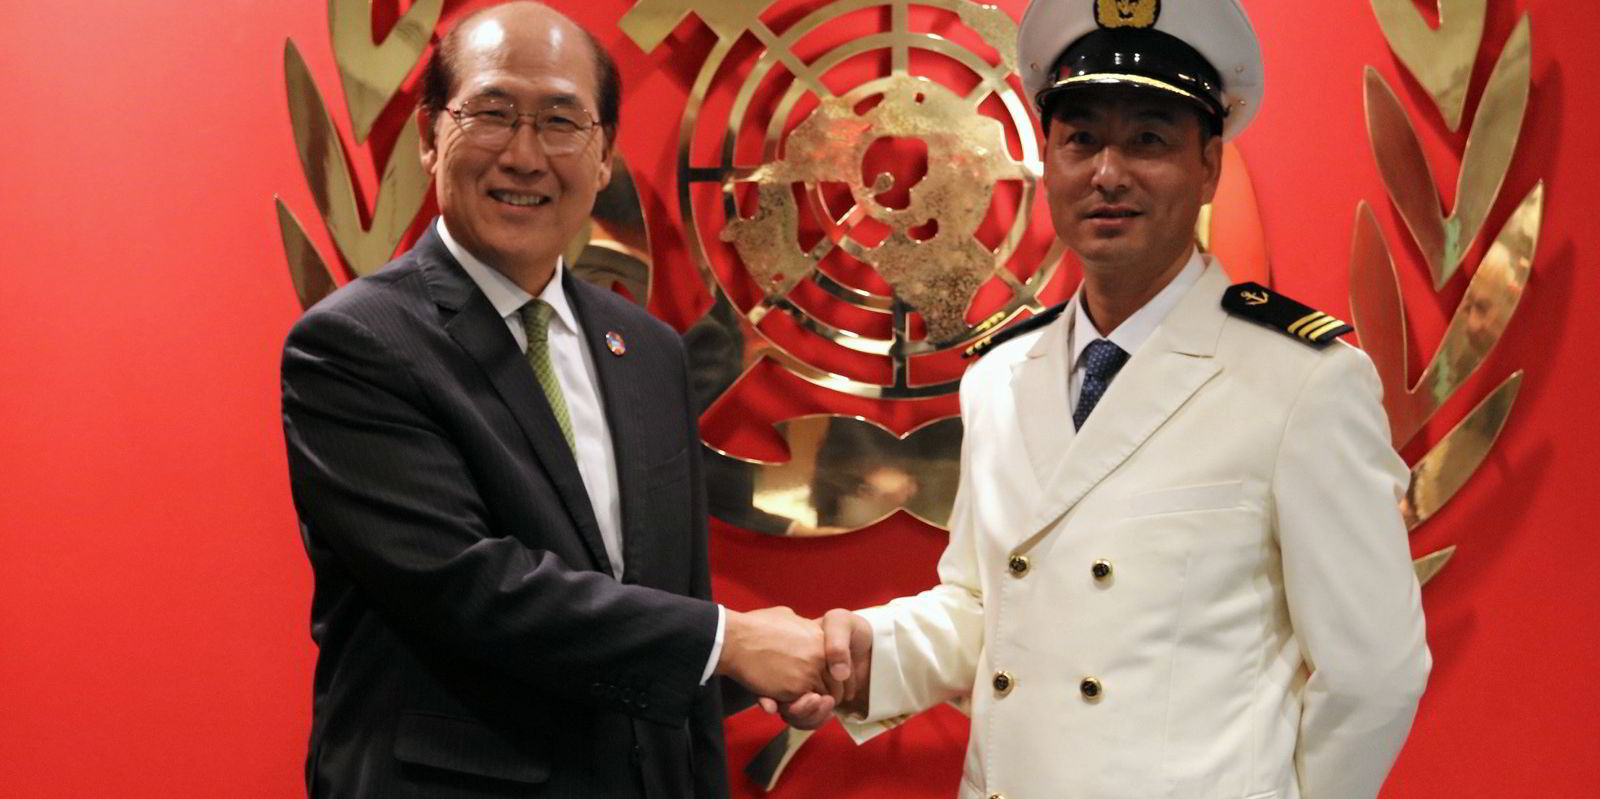 Race against death: chief officer tells of battle to save stricken seafarers | TradeWinds